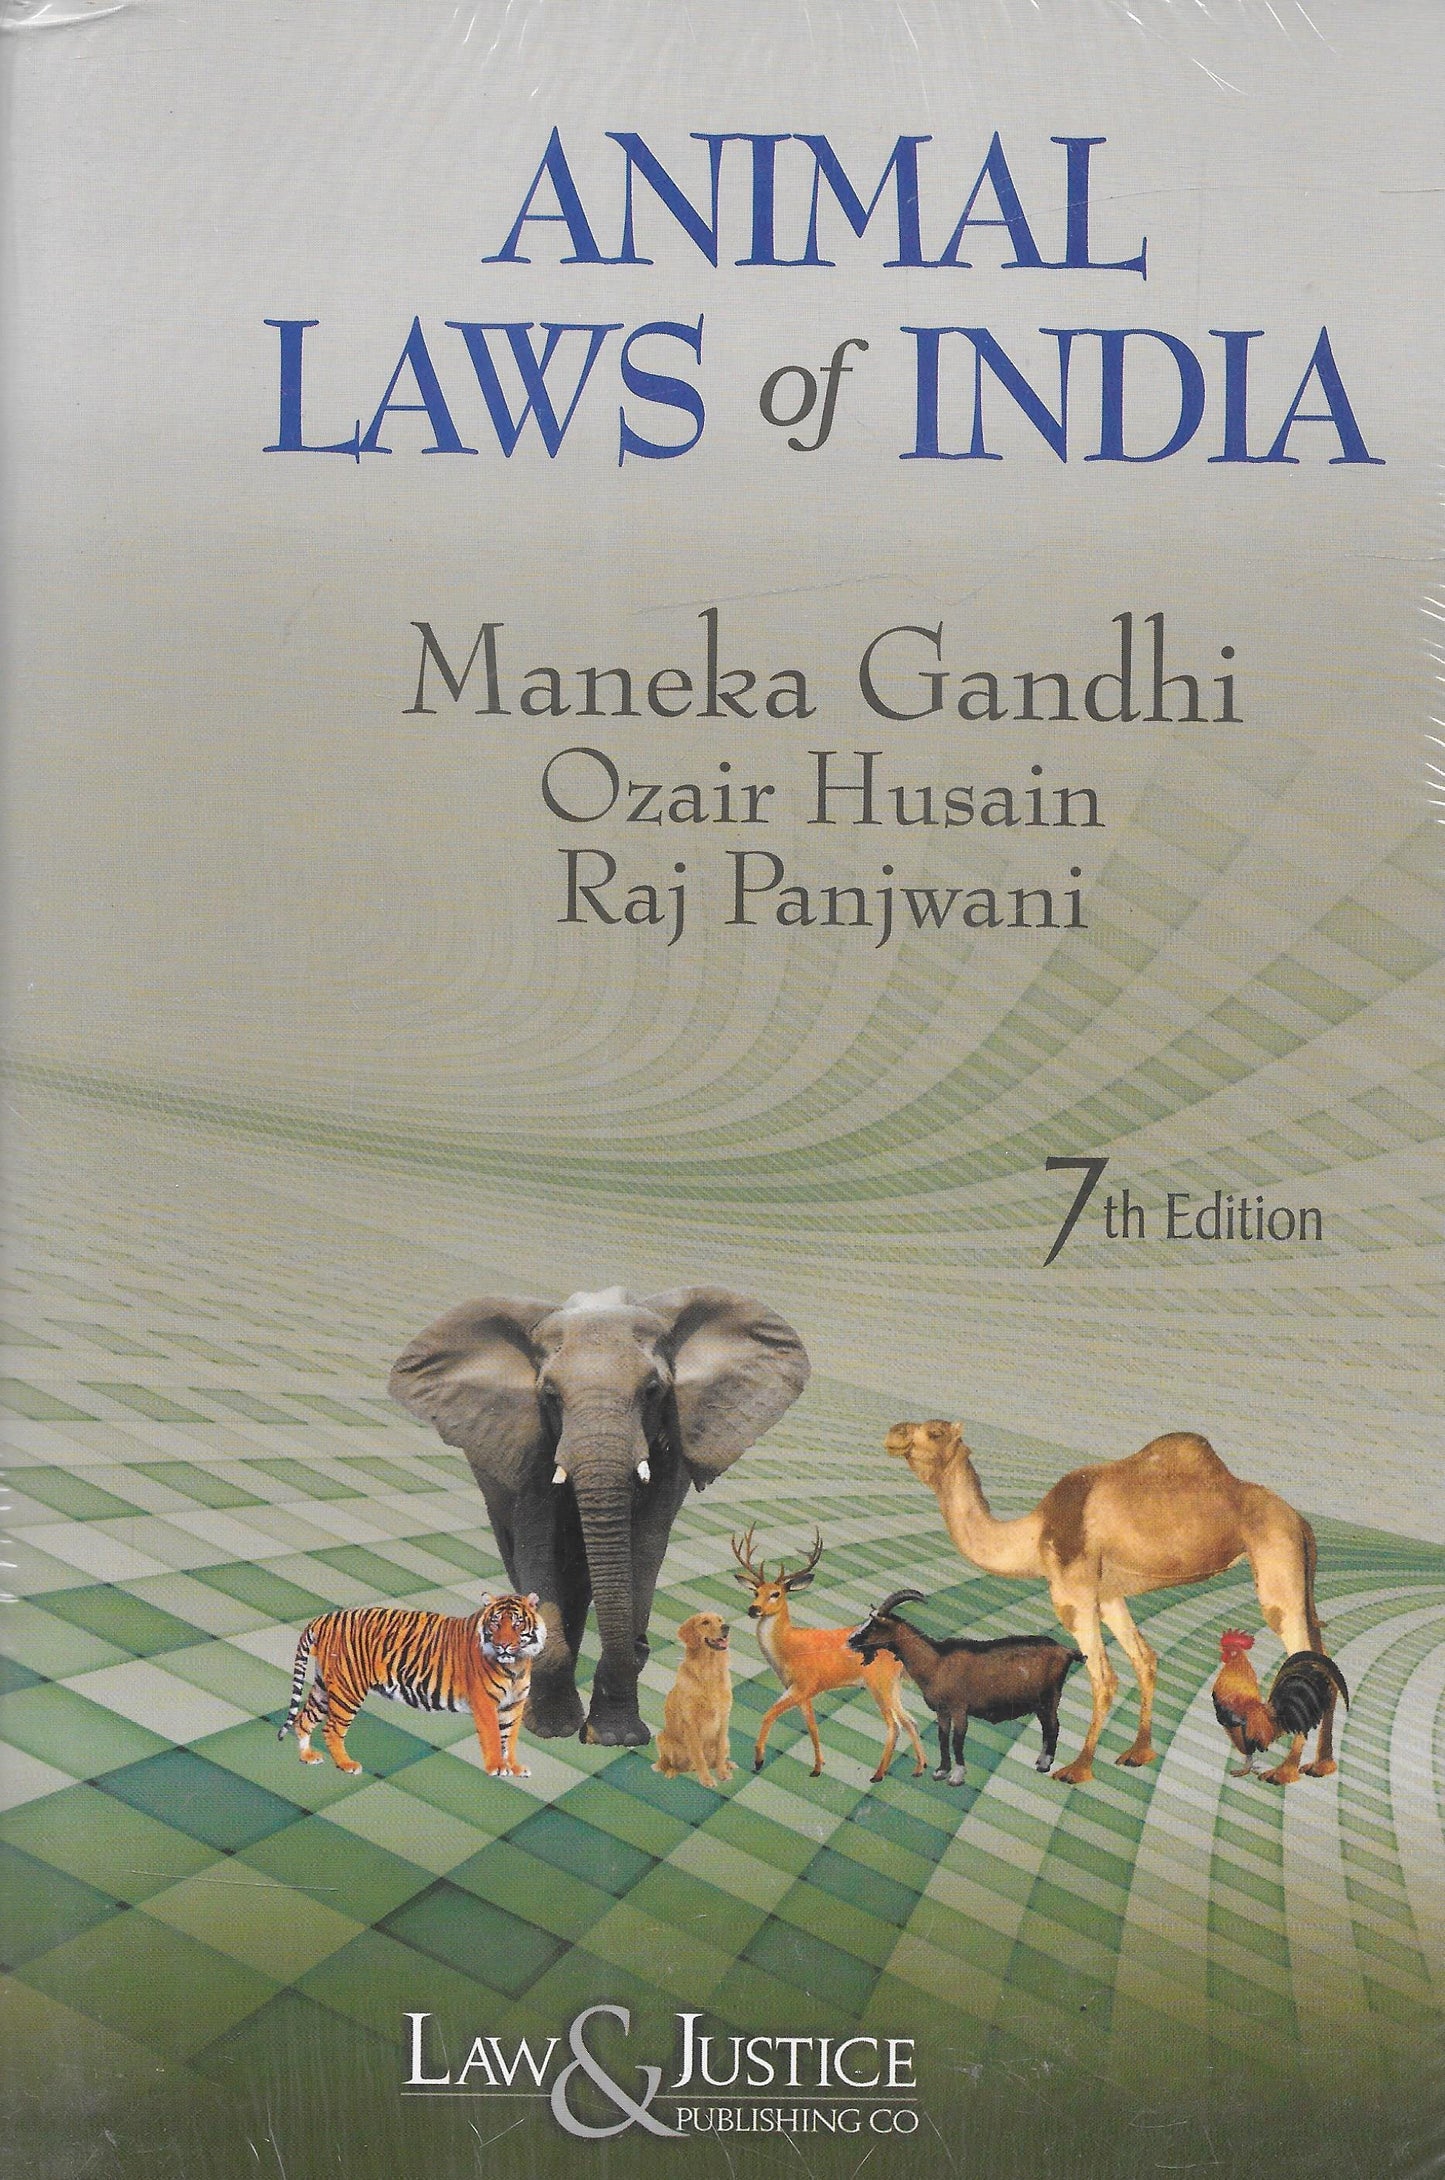 Animal Laws of India